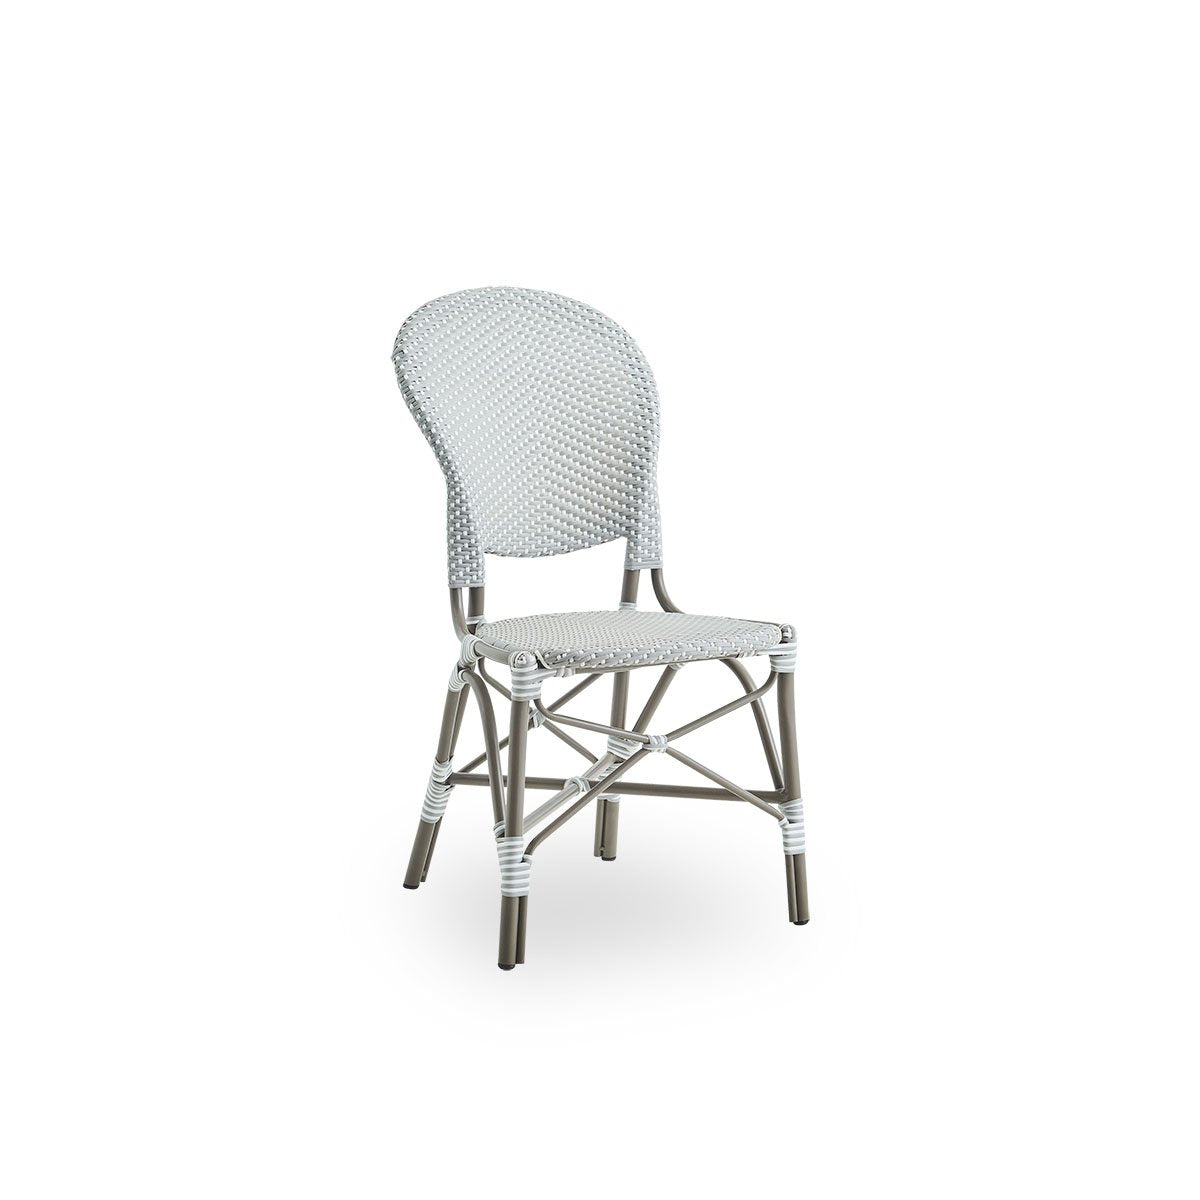 Isabell Exterior Dining Chair by Sika